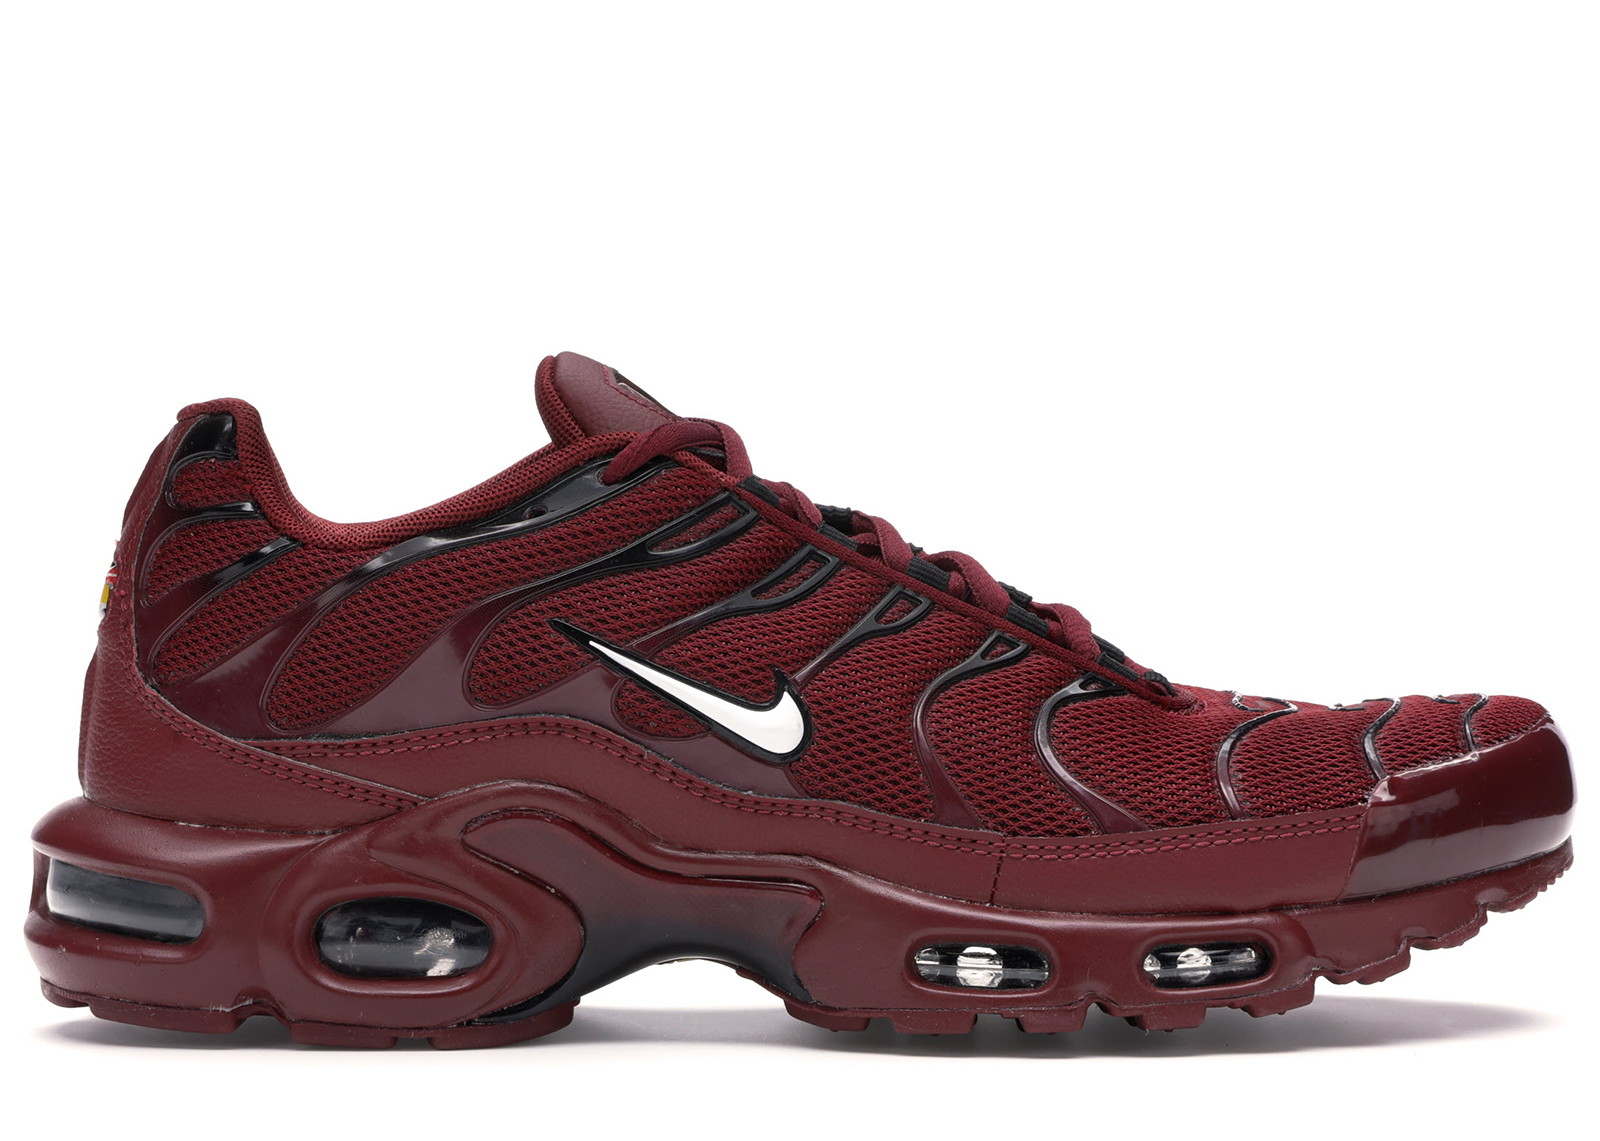 nike air max plus red and blue